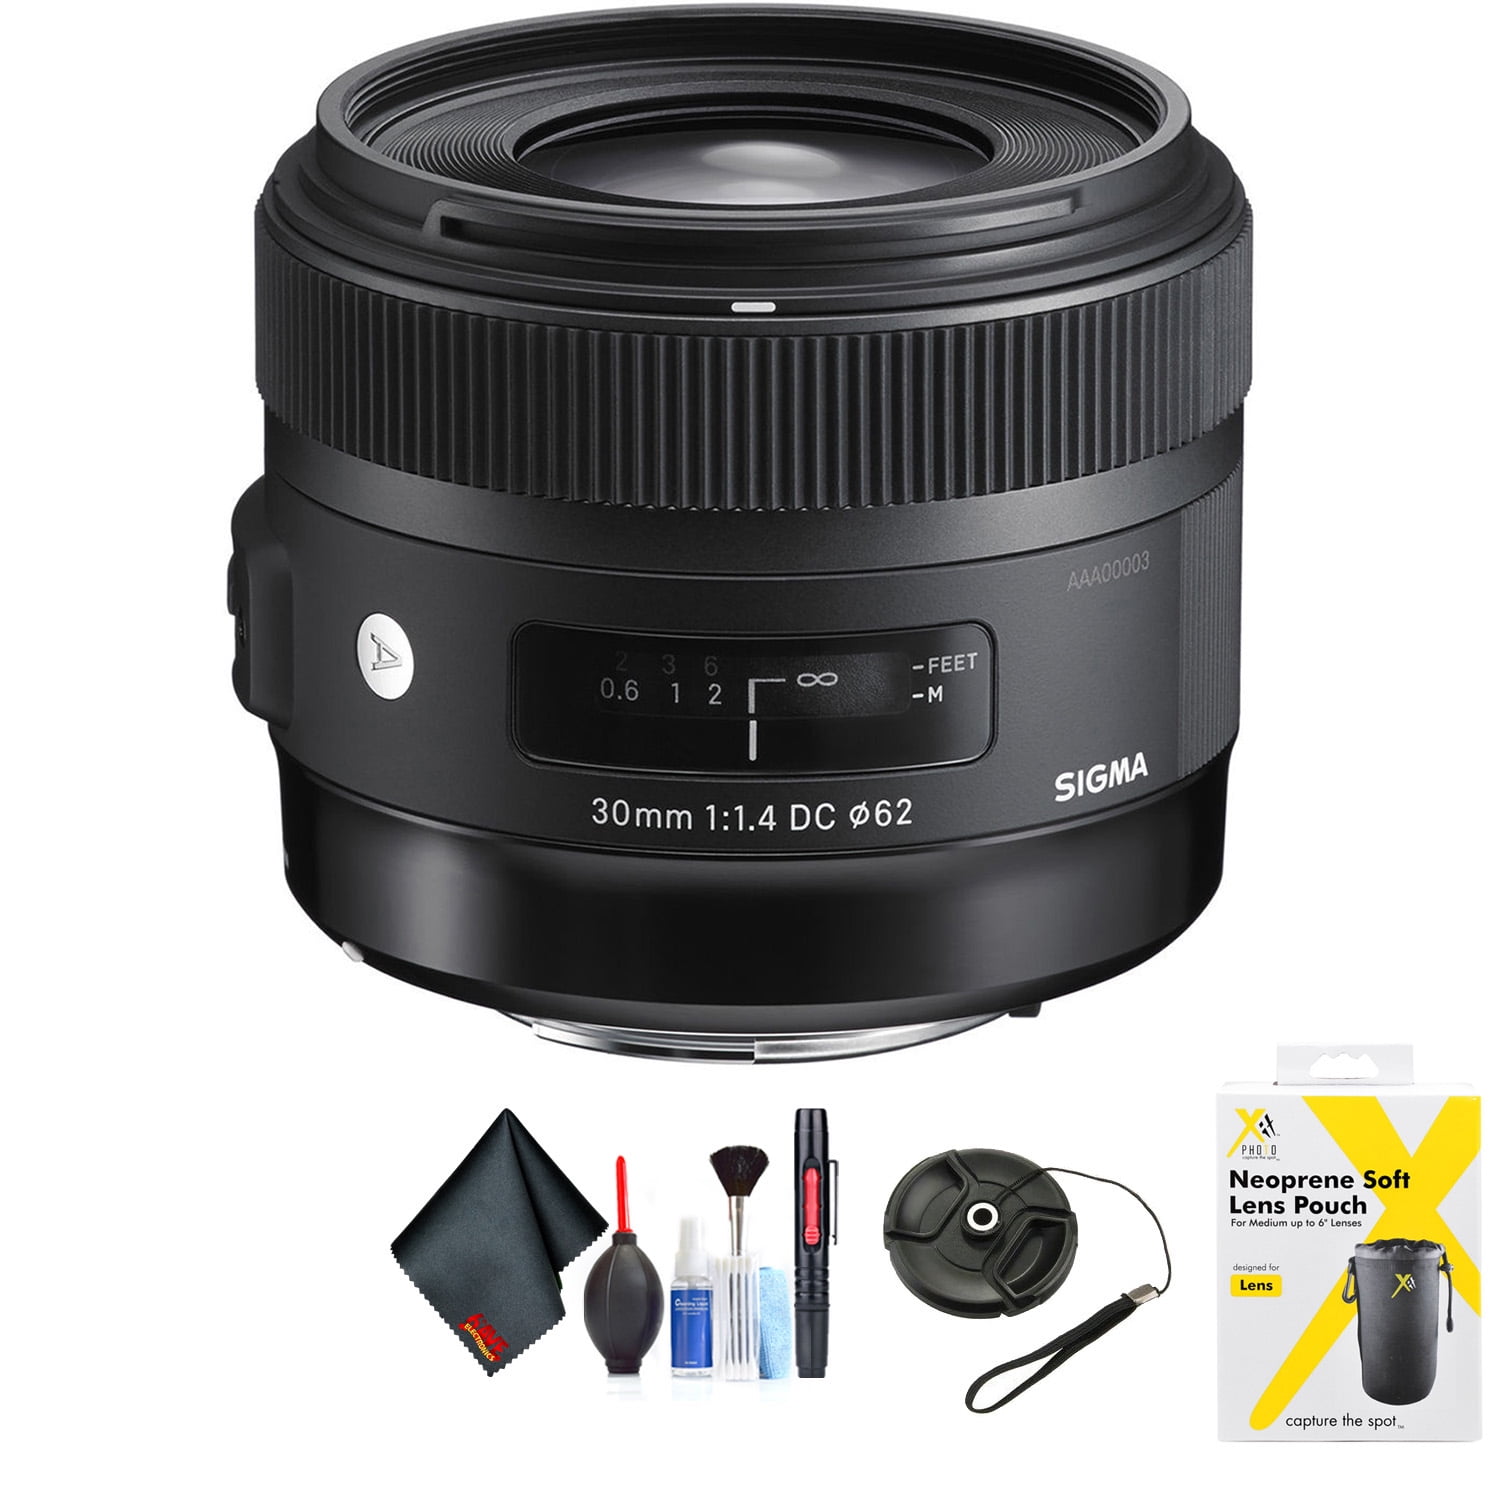 Sigma 30mm f/1.4 DC HSM Art Lens for Nikon for Nikon F Mount + Accessories  (International Model with 2 Year Warranty)